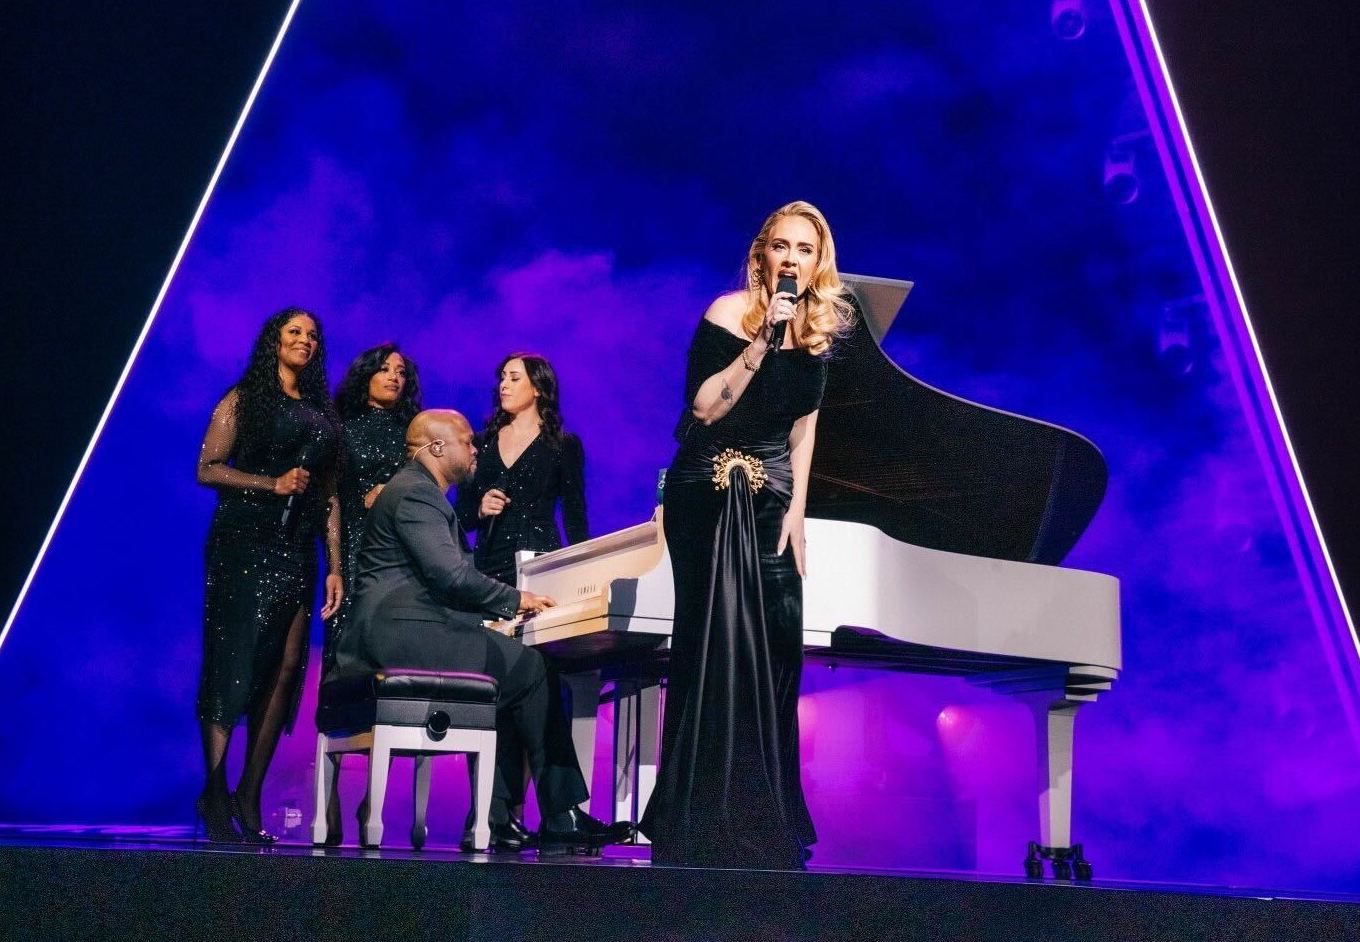 A pianist onstage with singer Adele and three backing singers.